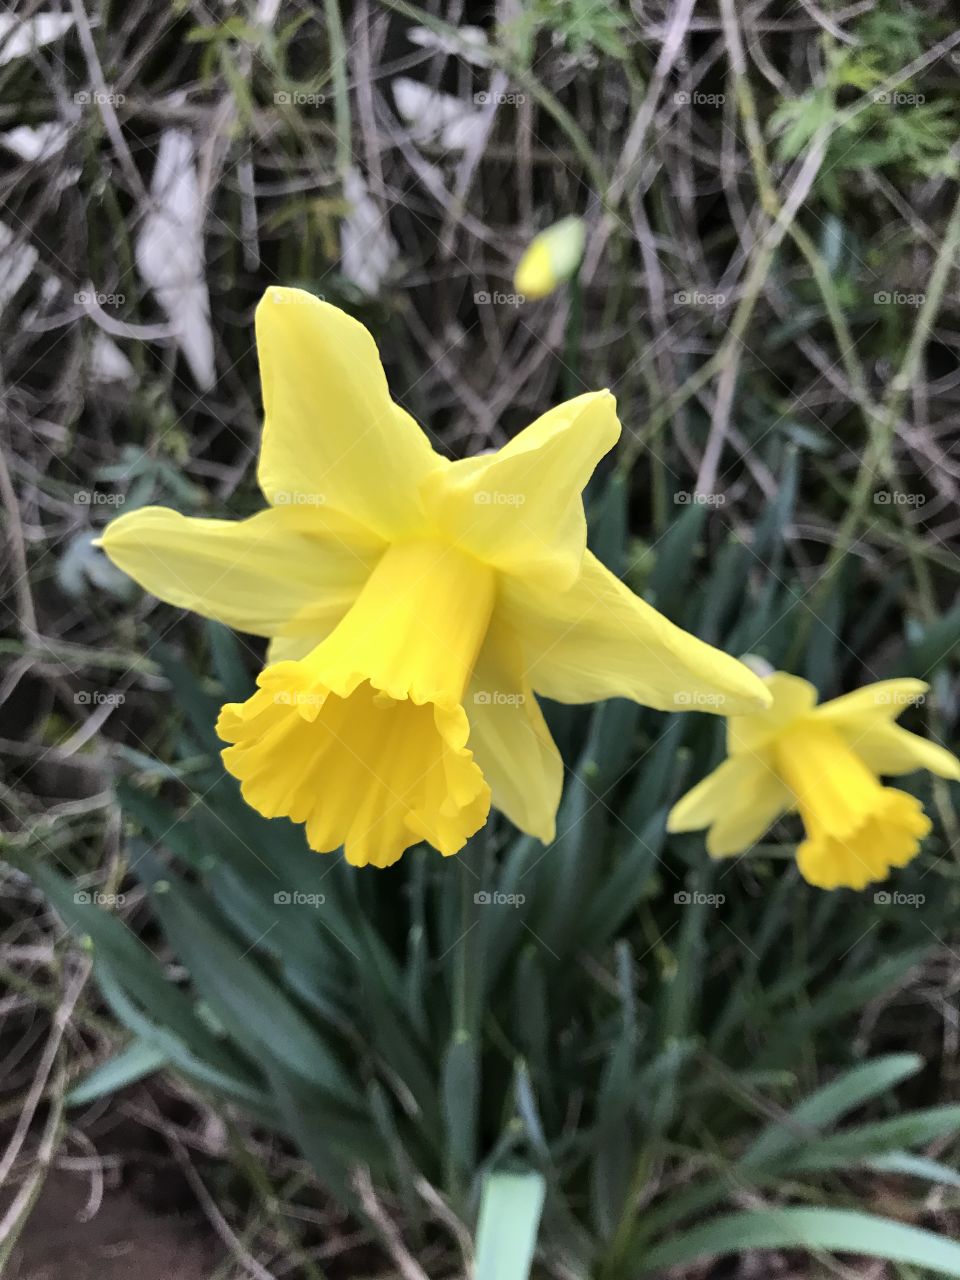 Just spotted the first two daffodils in Devon, UK.